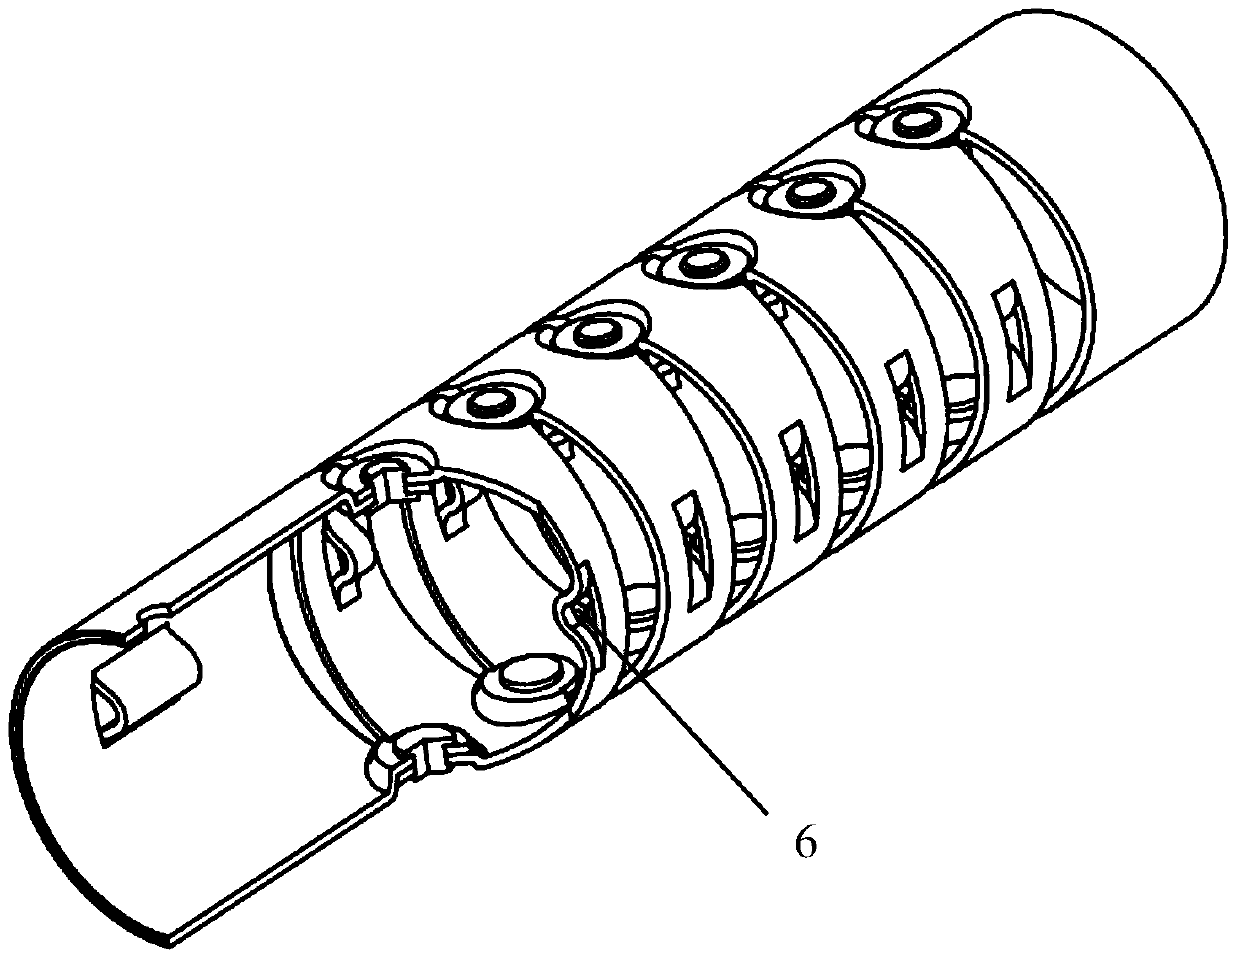 Endoscope joint ring, endoscope bent part and corresponding endoscope device